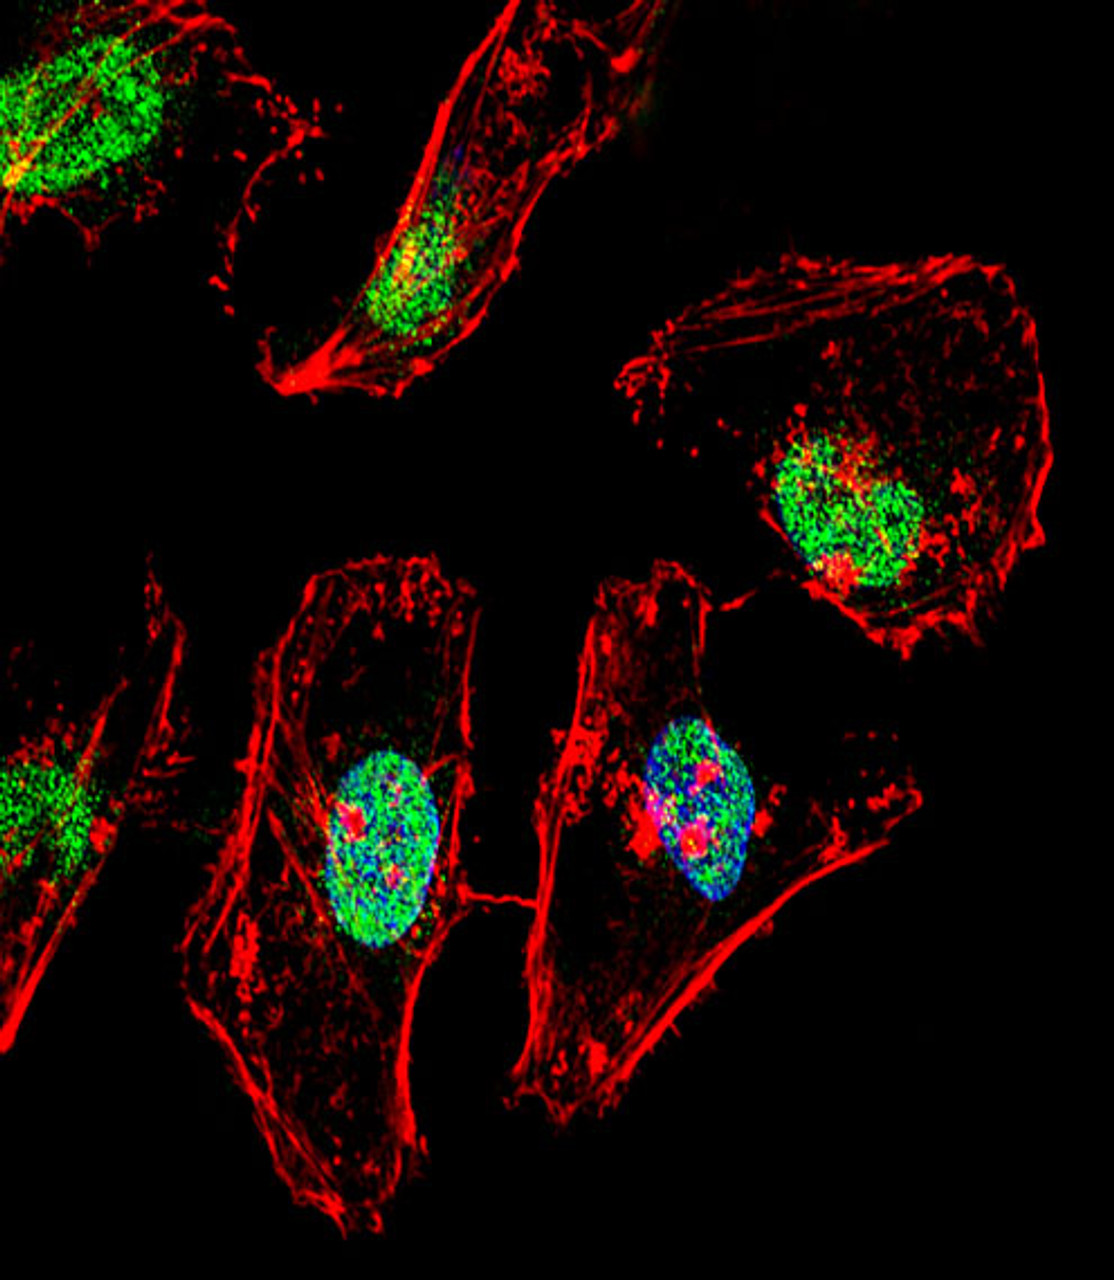 Fluorescent confocal image of Hela cell stained with TBX6 Antibody . Hela cells were fixed with 4% PFA (20 min) , permeabilized with Triton X-100 (0.1%, 10 min) , then incubated with TBX6 primary antibody (1:25) . For secondary antibody, Alexa Fluor 488 conjugated donkey anti-rabbit antibody (green) was used (1:400) .Cytoplasmic actin was counterstained with Alexa Fluor 555 (red) conjugated Phalloidin (7units/ml) . Nuclei were counterstained with DAPI (blue) (10 ug/ml, 10 min) . TBX6 immunoreactivity is localized to nucleus significantly.